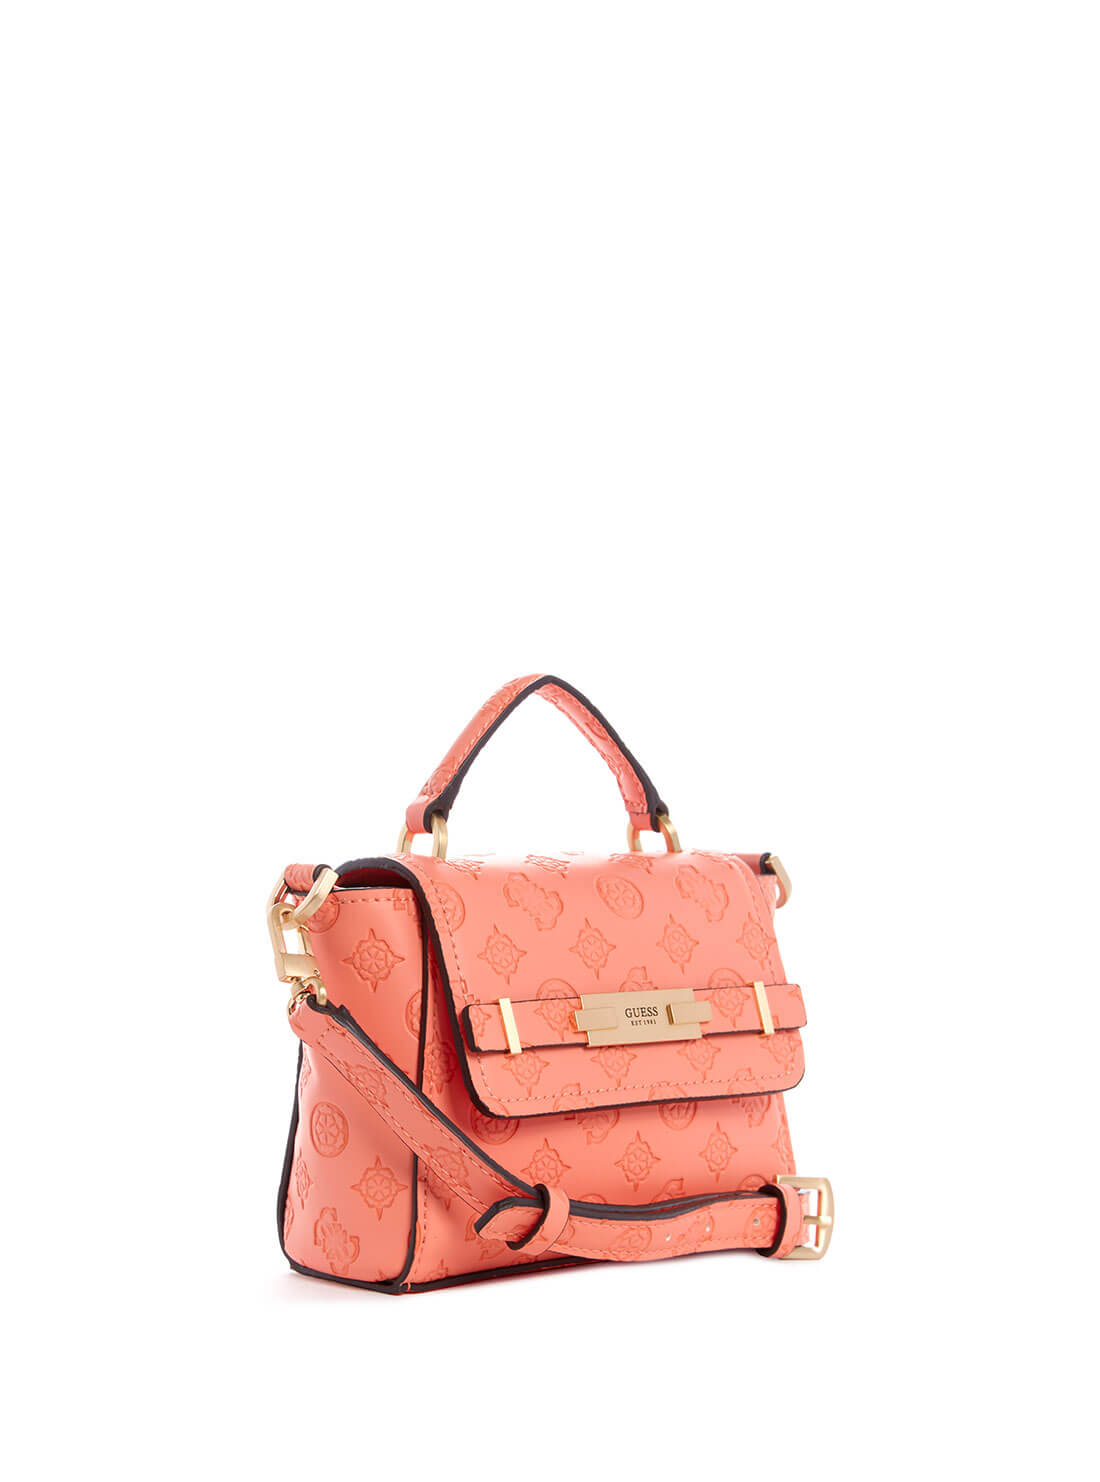 GUESS Coral Bea Mini Top Handle Bag side view